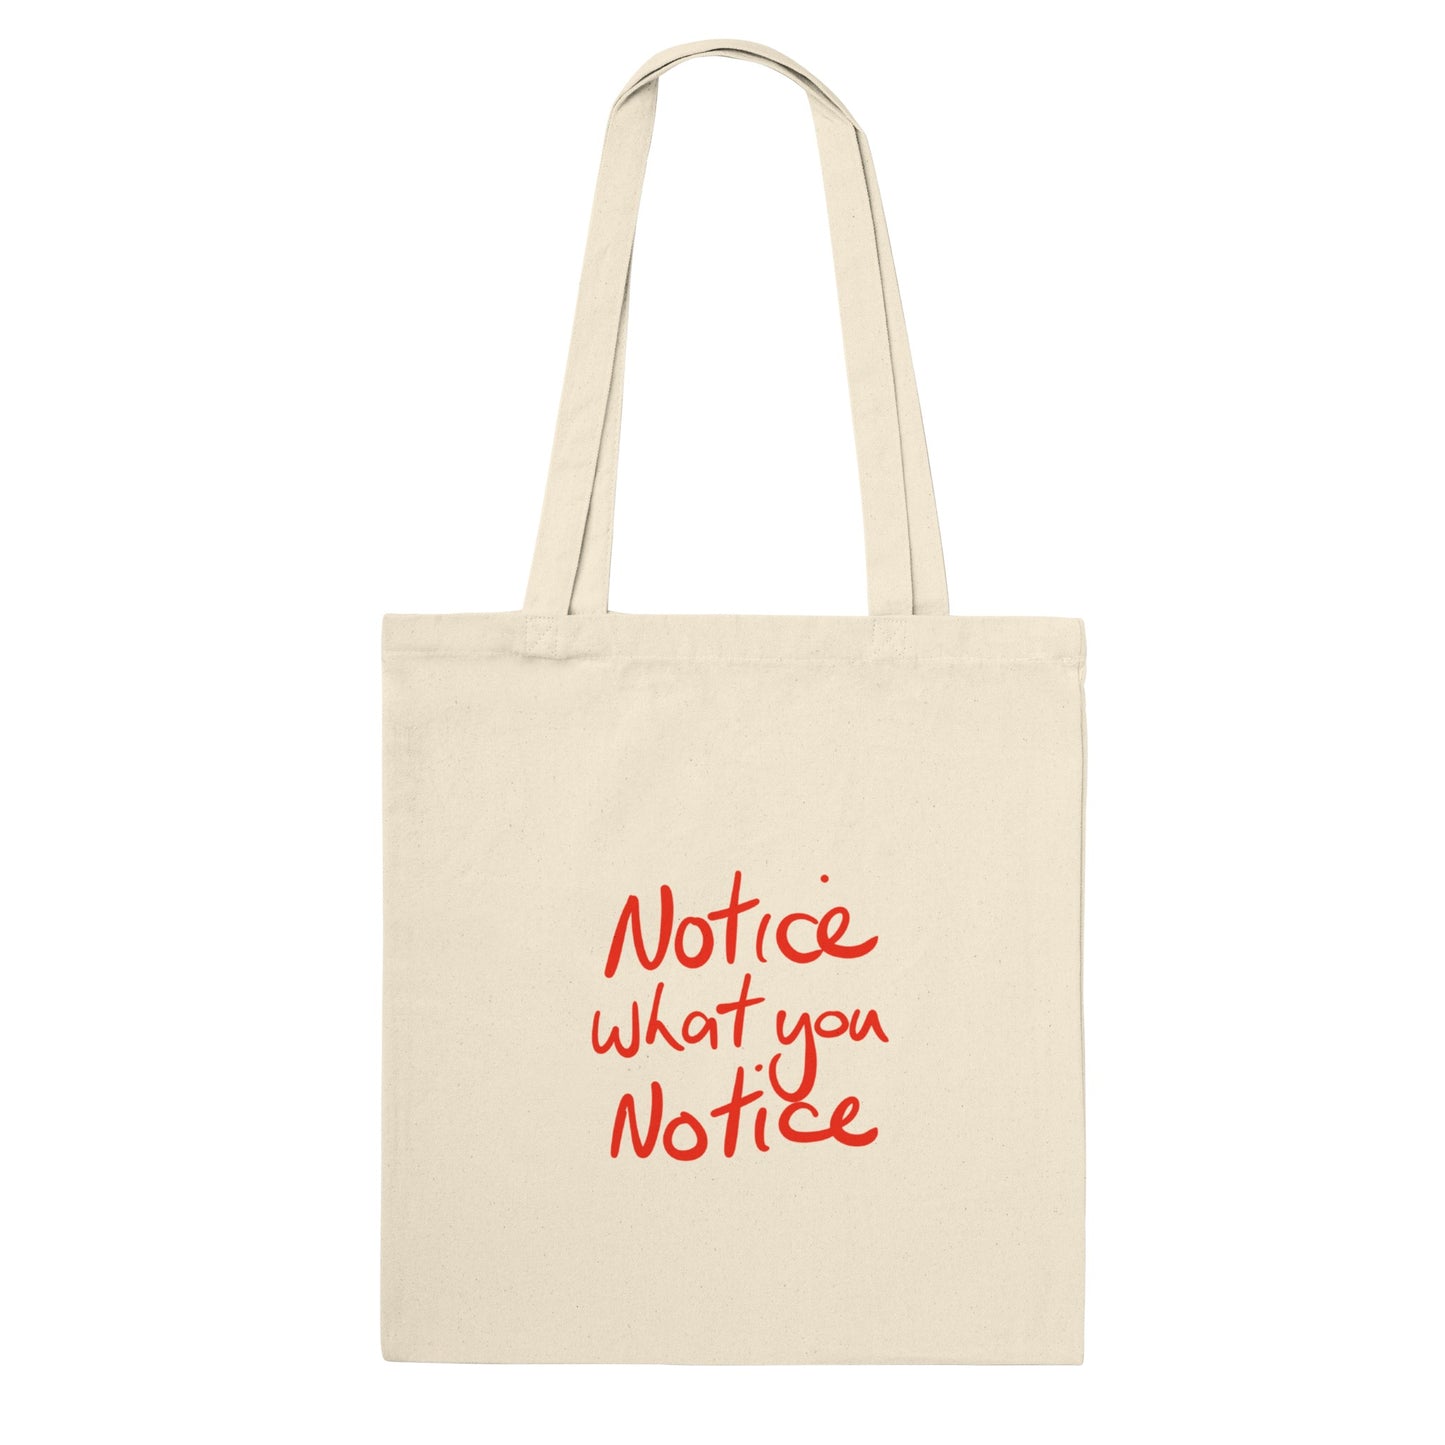 'Notice what you notice' Red on natural colour cotton Premium Tote Bag. Free Shipping.